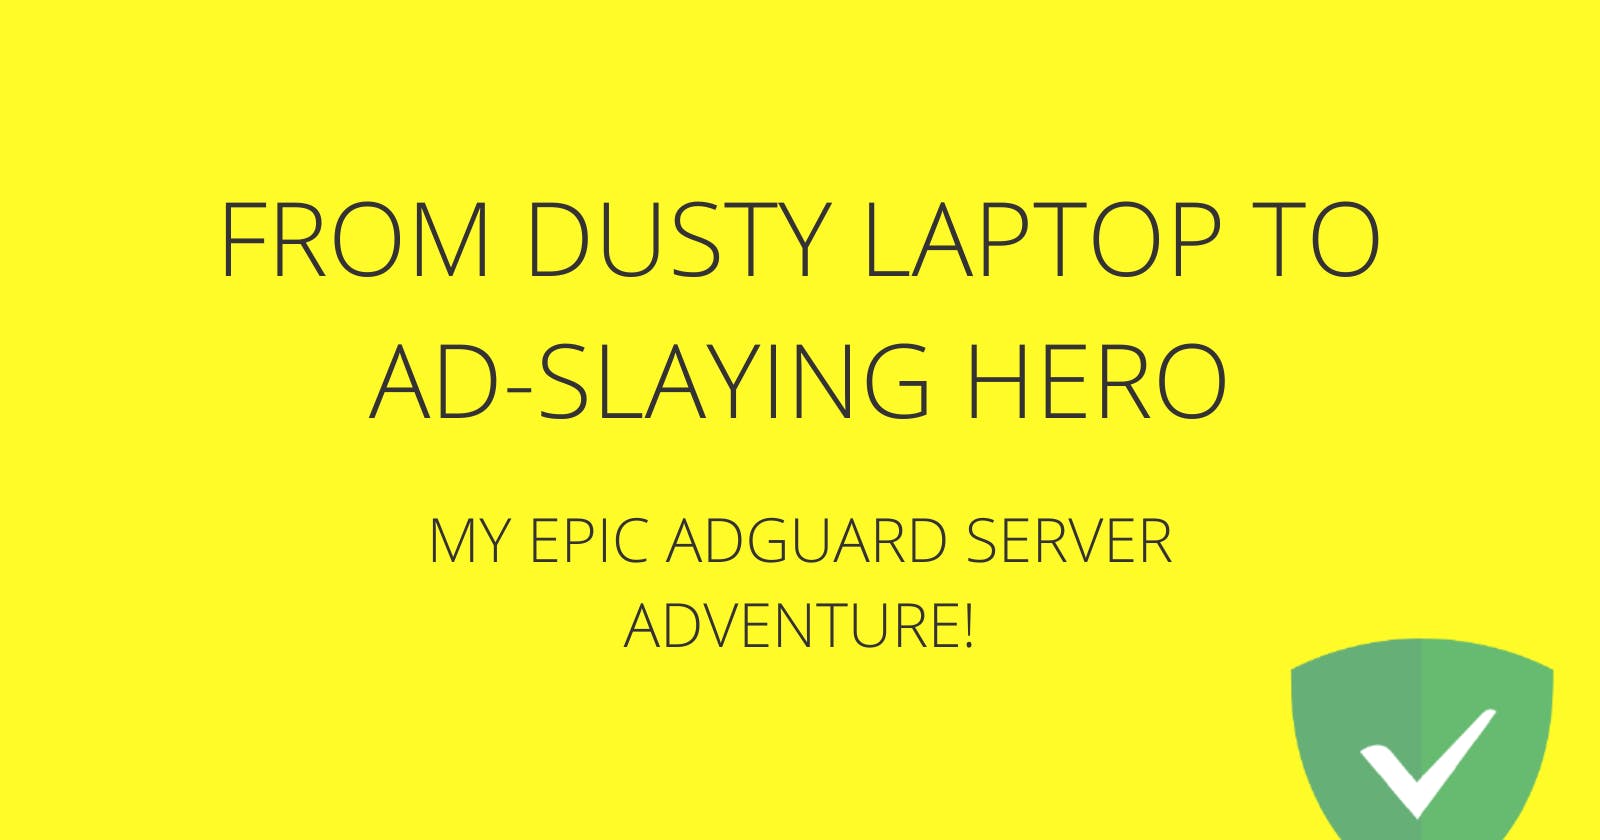 From Dusty Laptop to Ad-Slaying Hero: My Epic AdGuard Server Adventure!